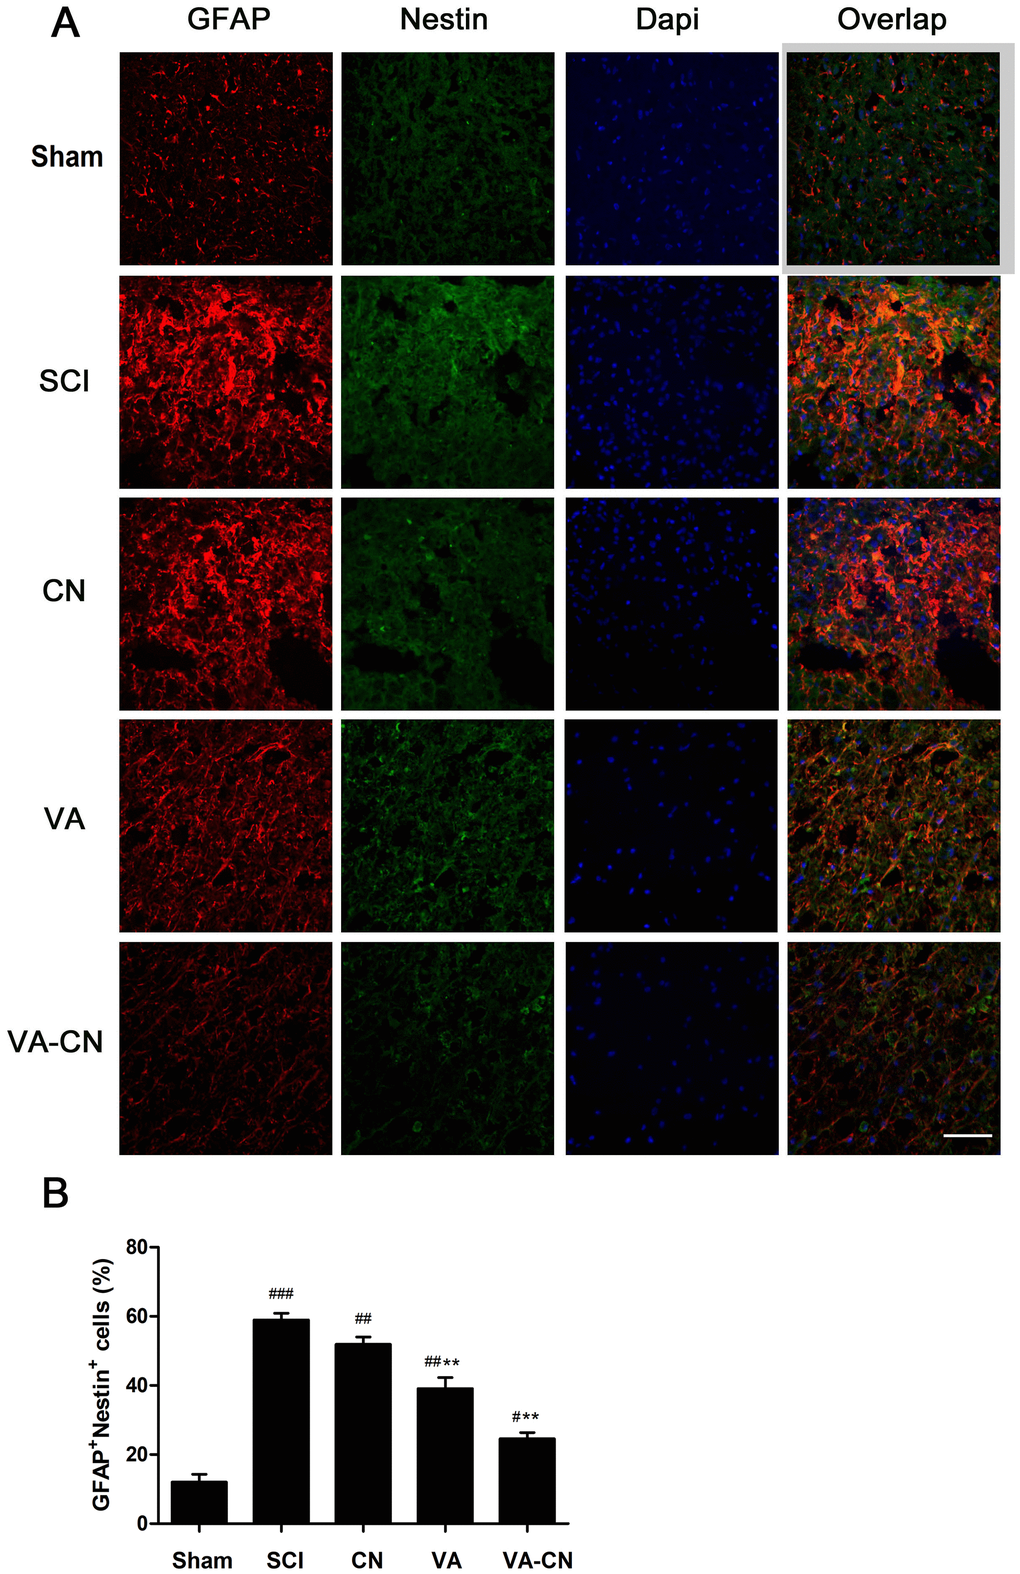 VA-CN reduced astrocytic reactivity in the injuried spinal cord grey matter. Levels of astrocytic reactivity was estimated by double immunostaining for GFAP and nestin. (A) Confocal images of injury sites analyzed for overlap of GFAP (red), nestin (green) and Dapi (blue), Scale bar: 50 μm. (B) The astrocytic reactivity was quantified by GFAP+nestin+ cells, n=6 per group, * p